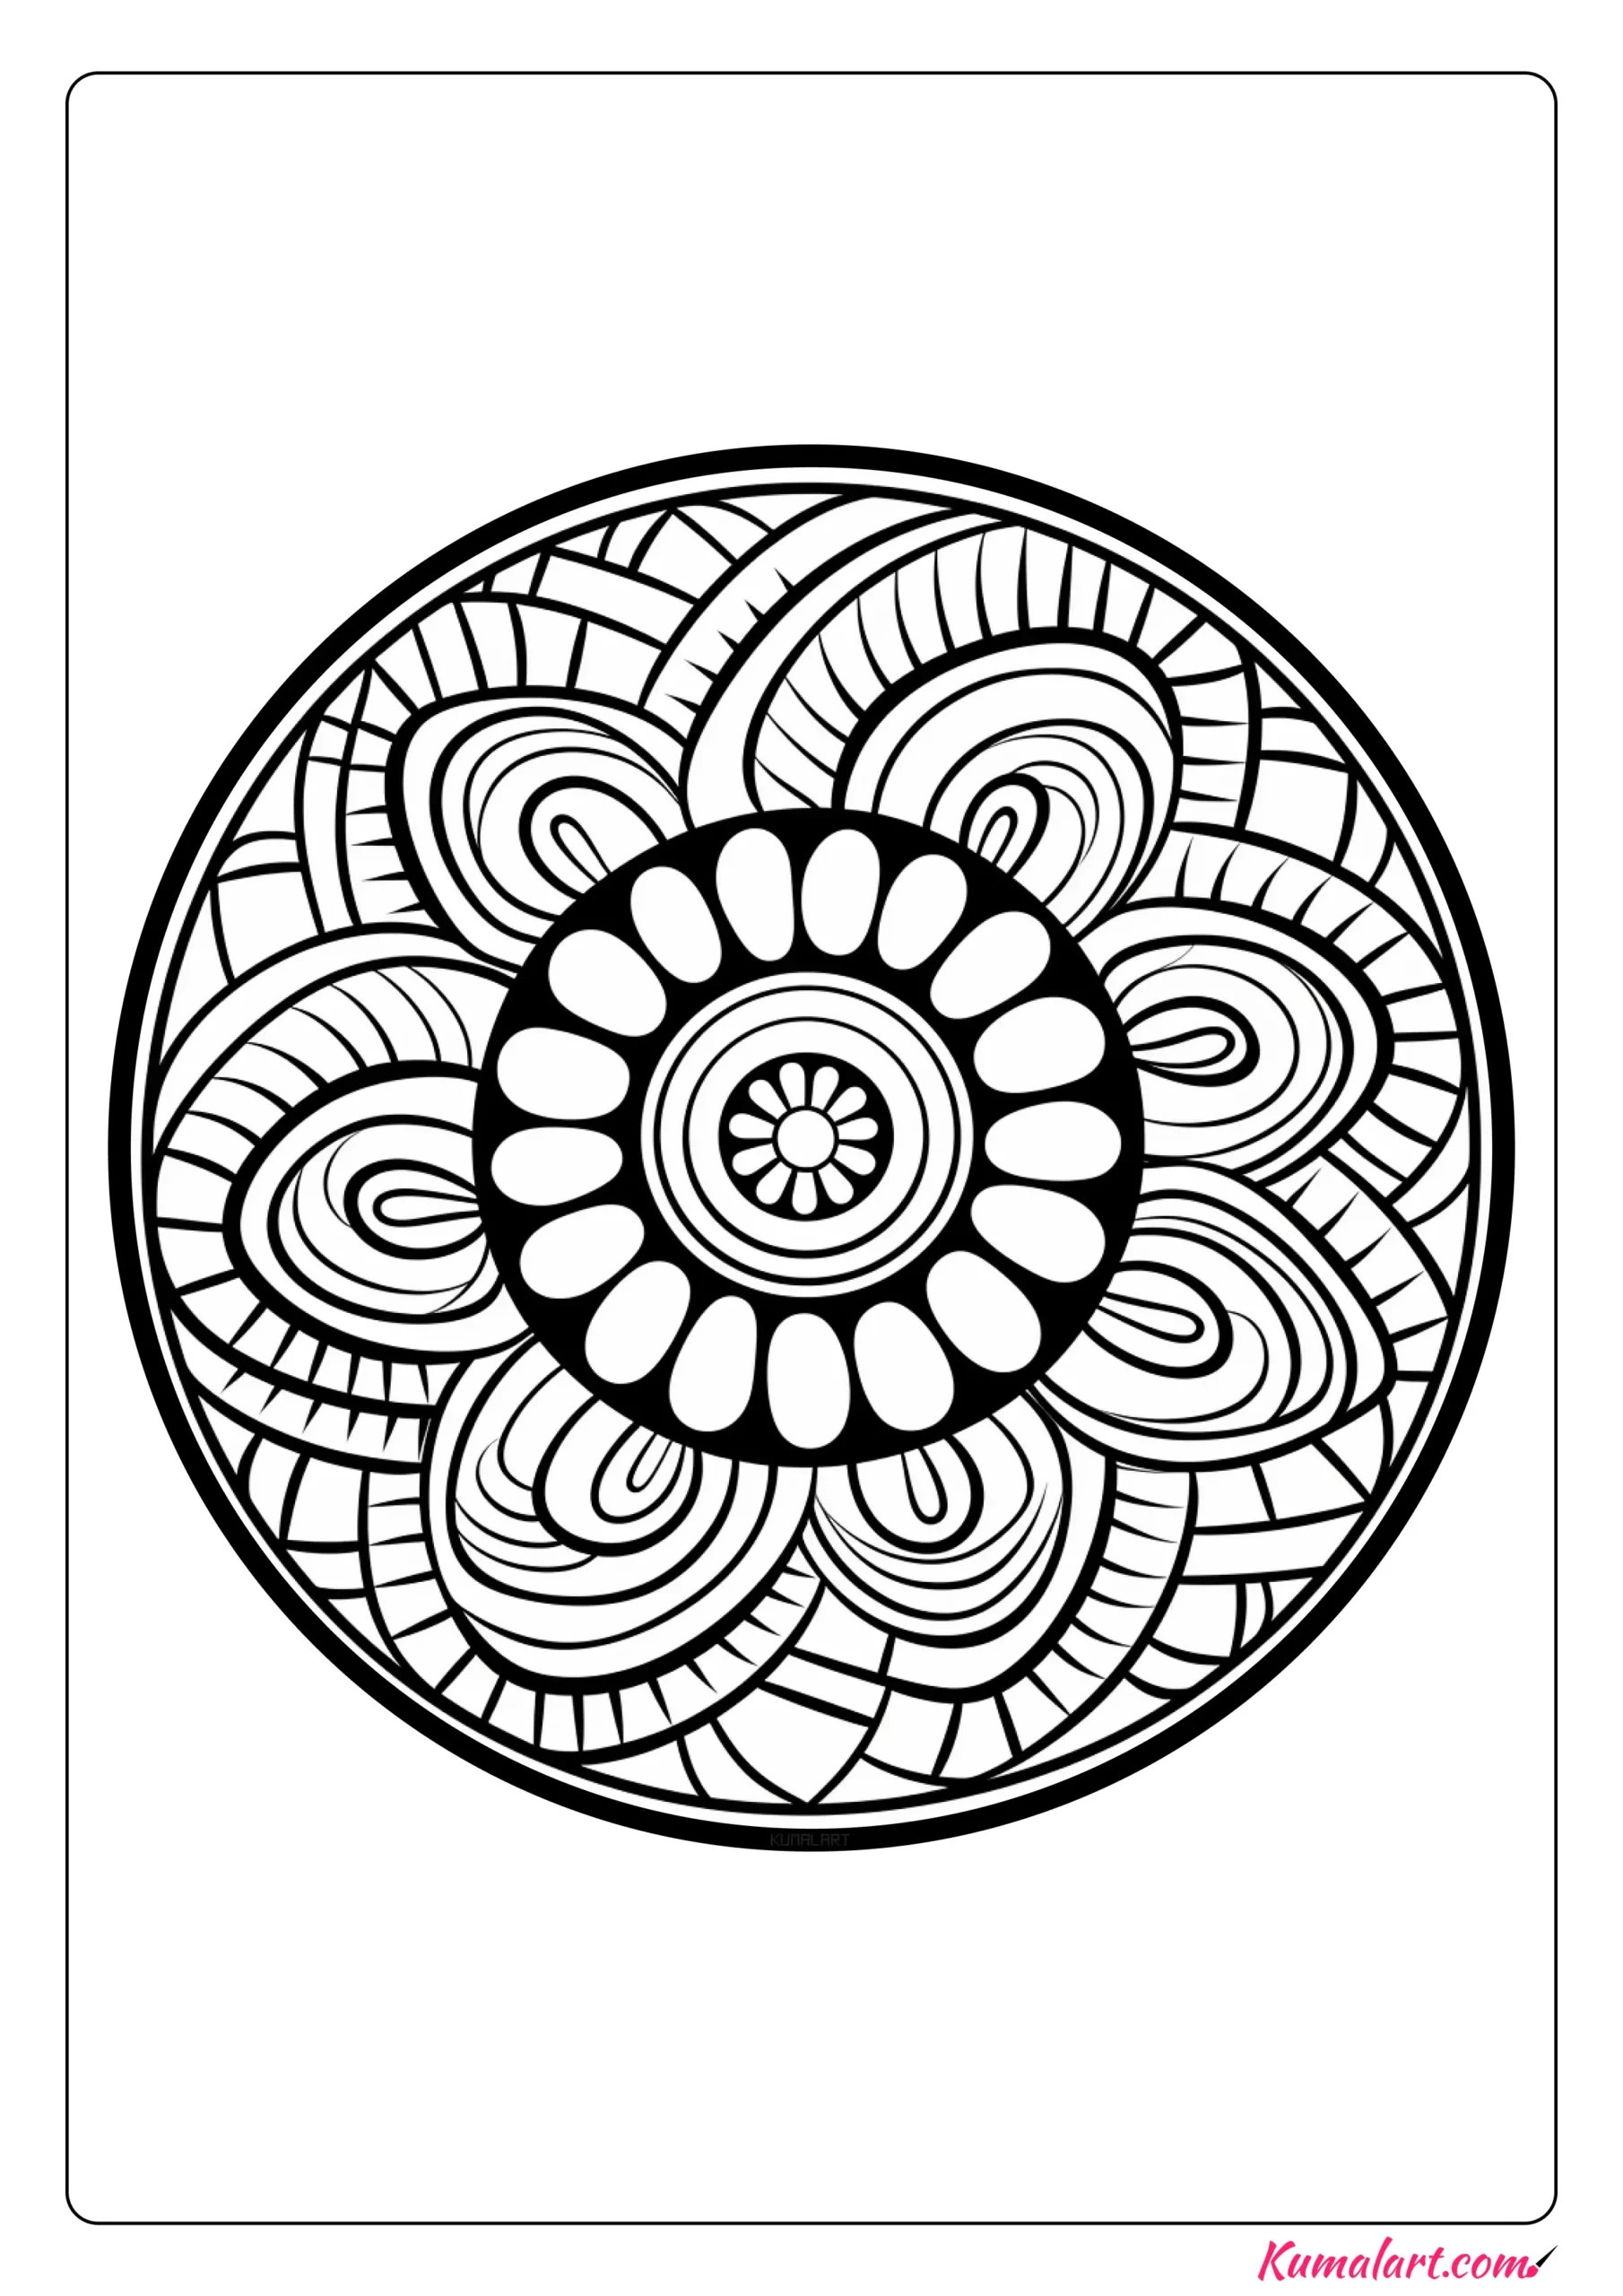 Calming Therapeutic Coloring Page